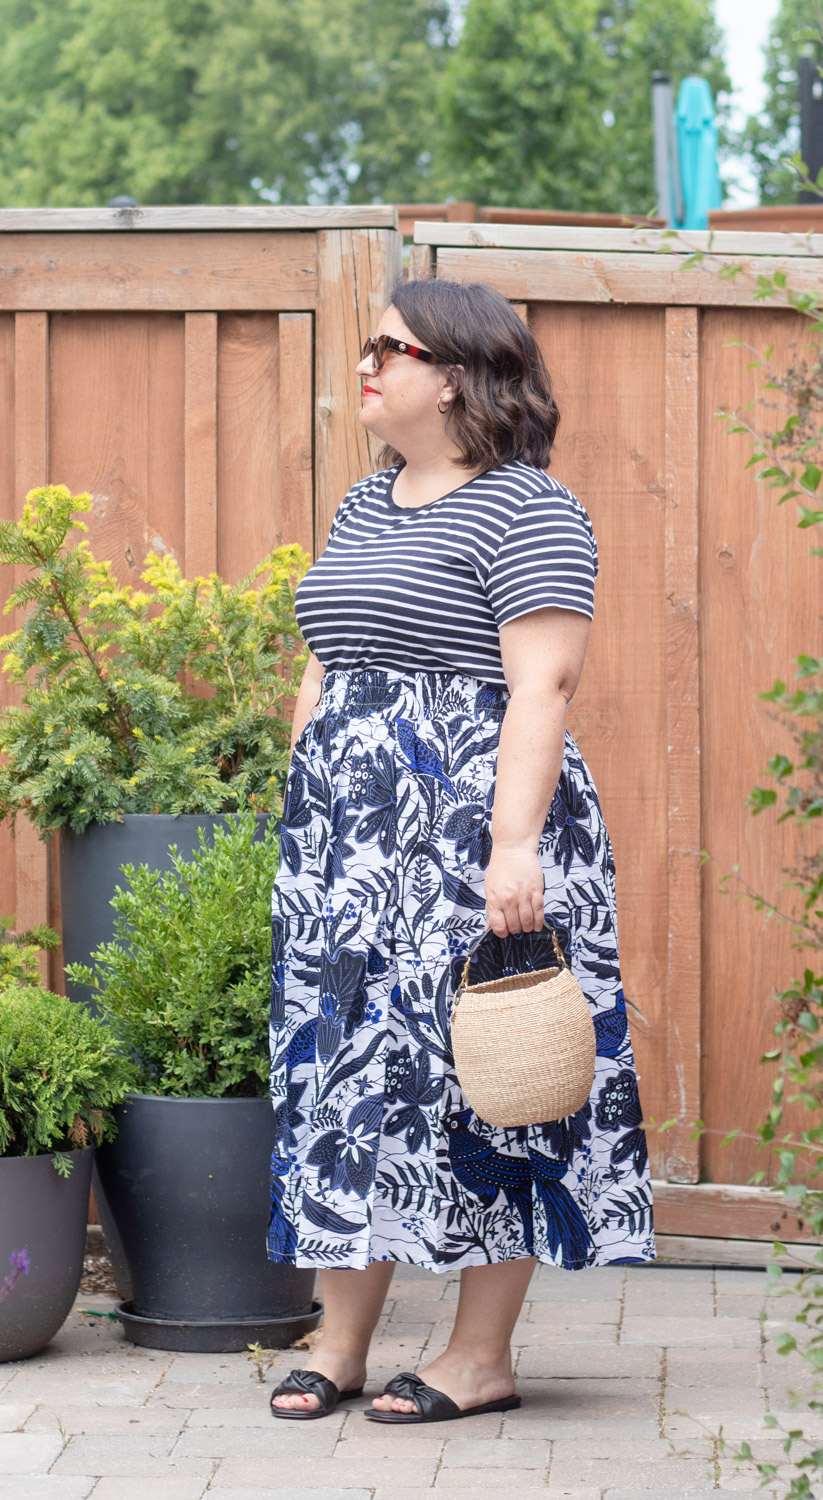 kemi telford skirt review, wax skirt outfit